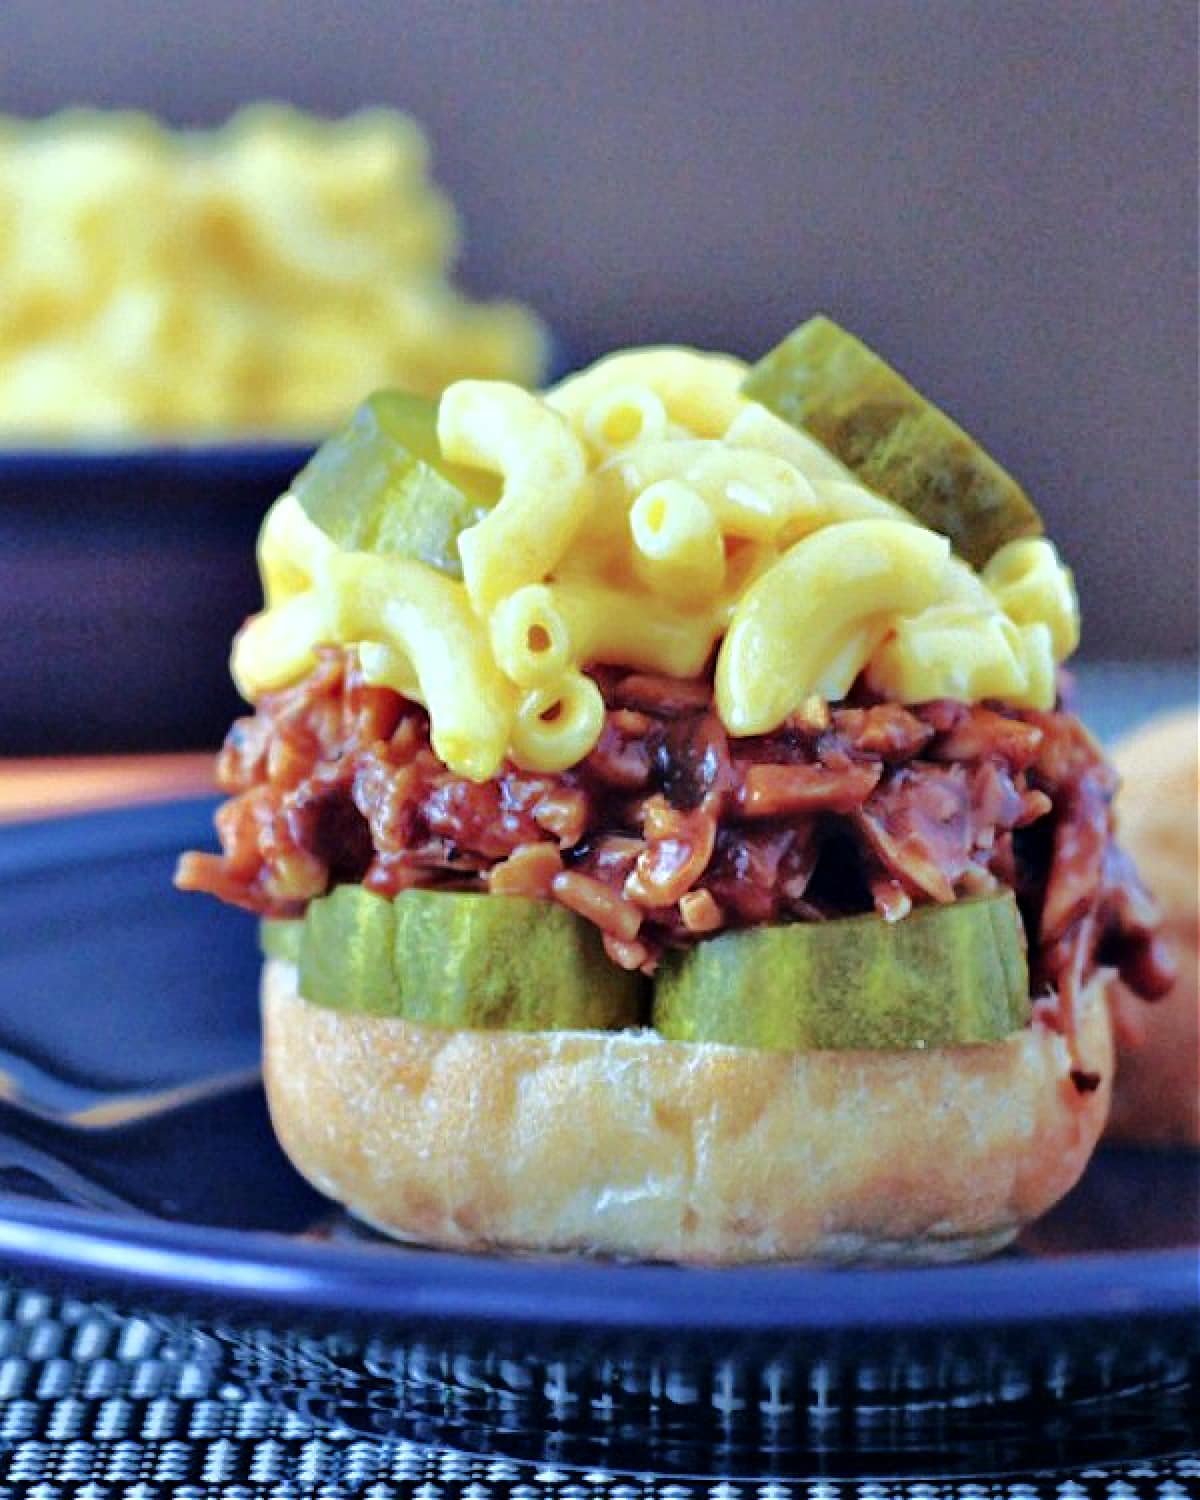 A vegan pulled pork made with porcini mushrooms in a slider bun with pickle slices and mac and cheese.